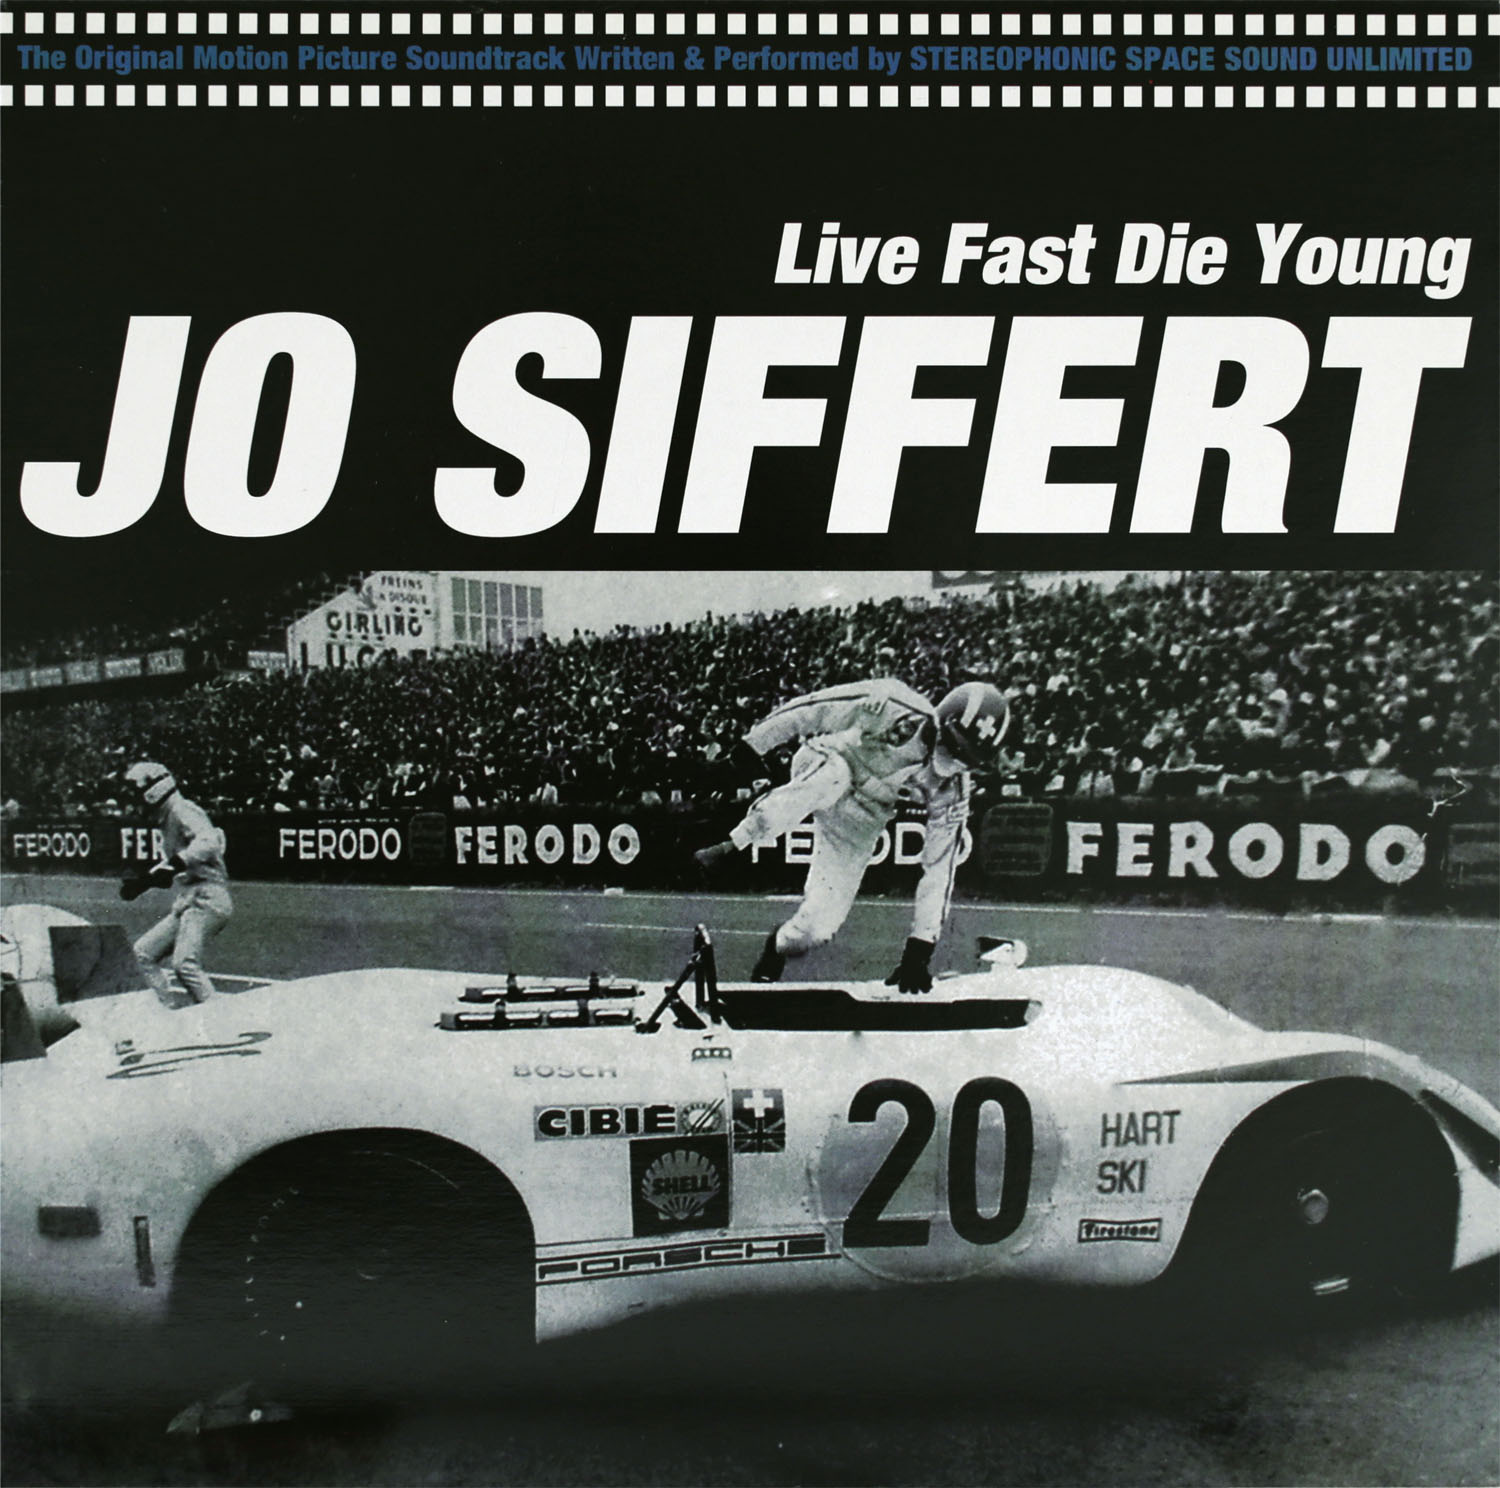  Stereophonic Space Sound Unlimited  Jo Siffert Live Fast Die Young 